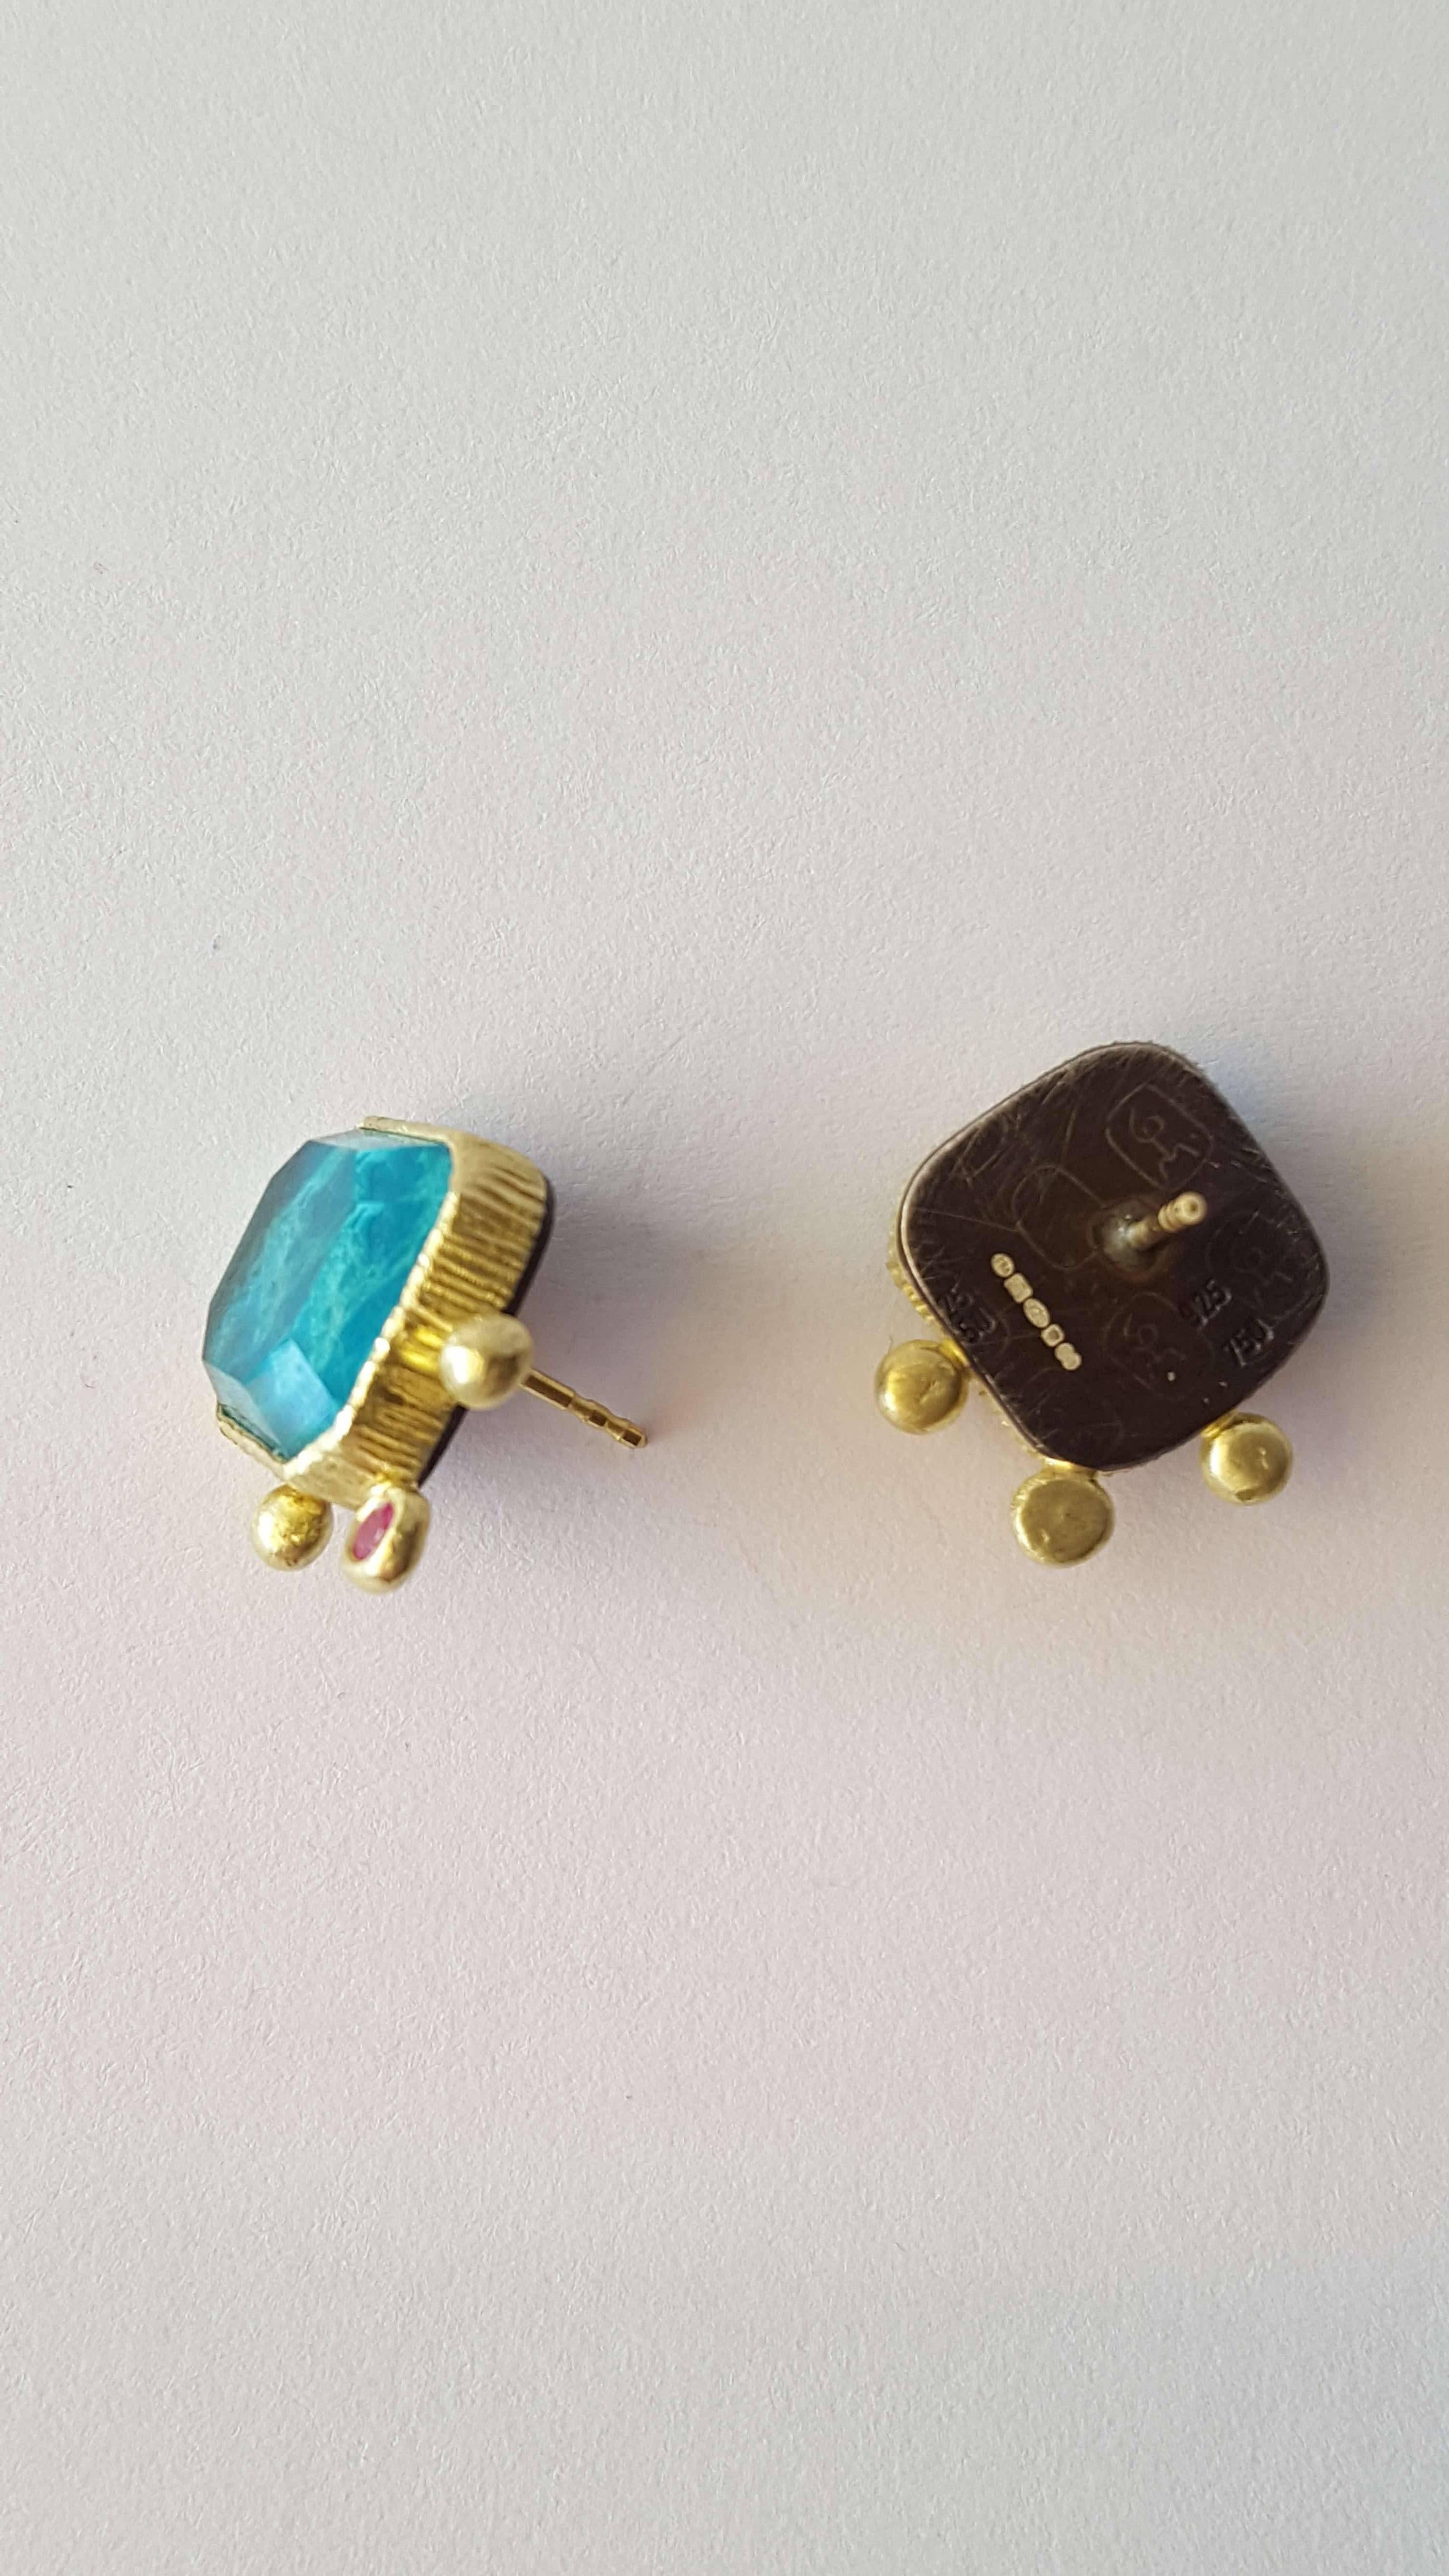 Lovely pair of stud earrings made with 18 karat green gold and black, oxidised sterling silver at the back with chrysocolla/rock crystal doublets and sapphires. Hand made and colourful earrings with amazing stones. Posts are 18 karat gold and